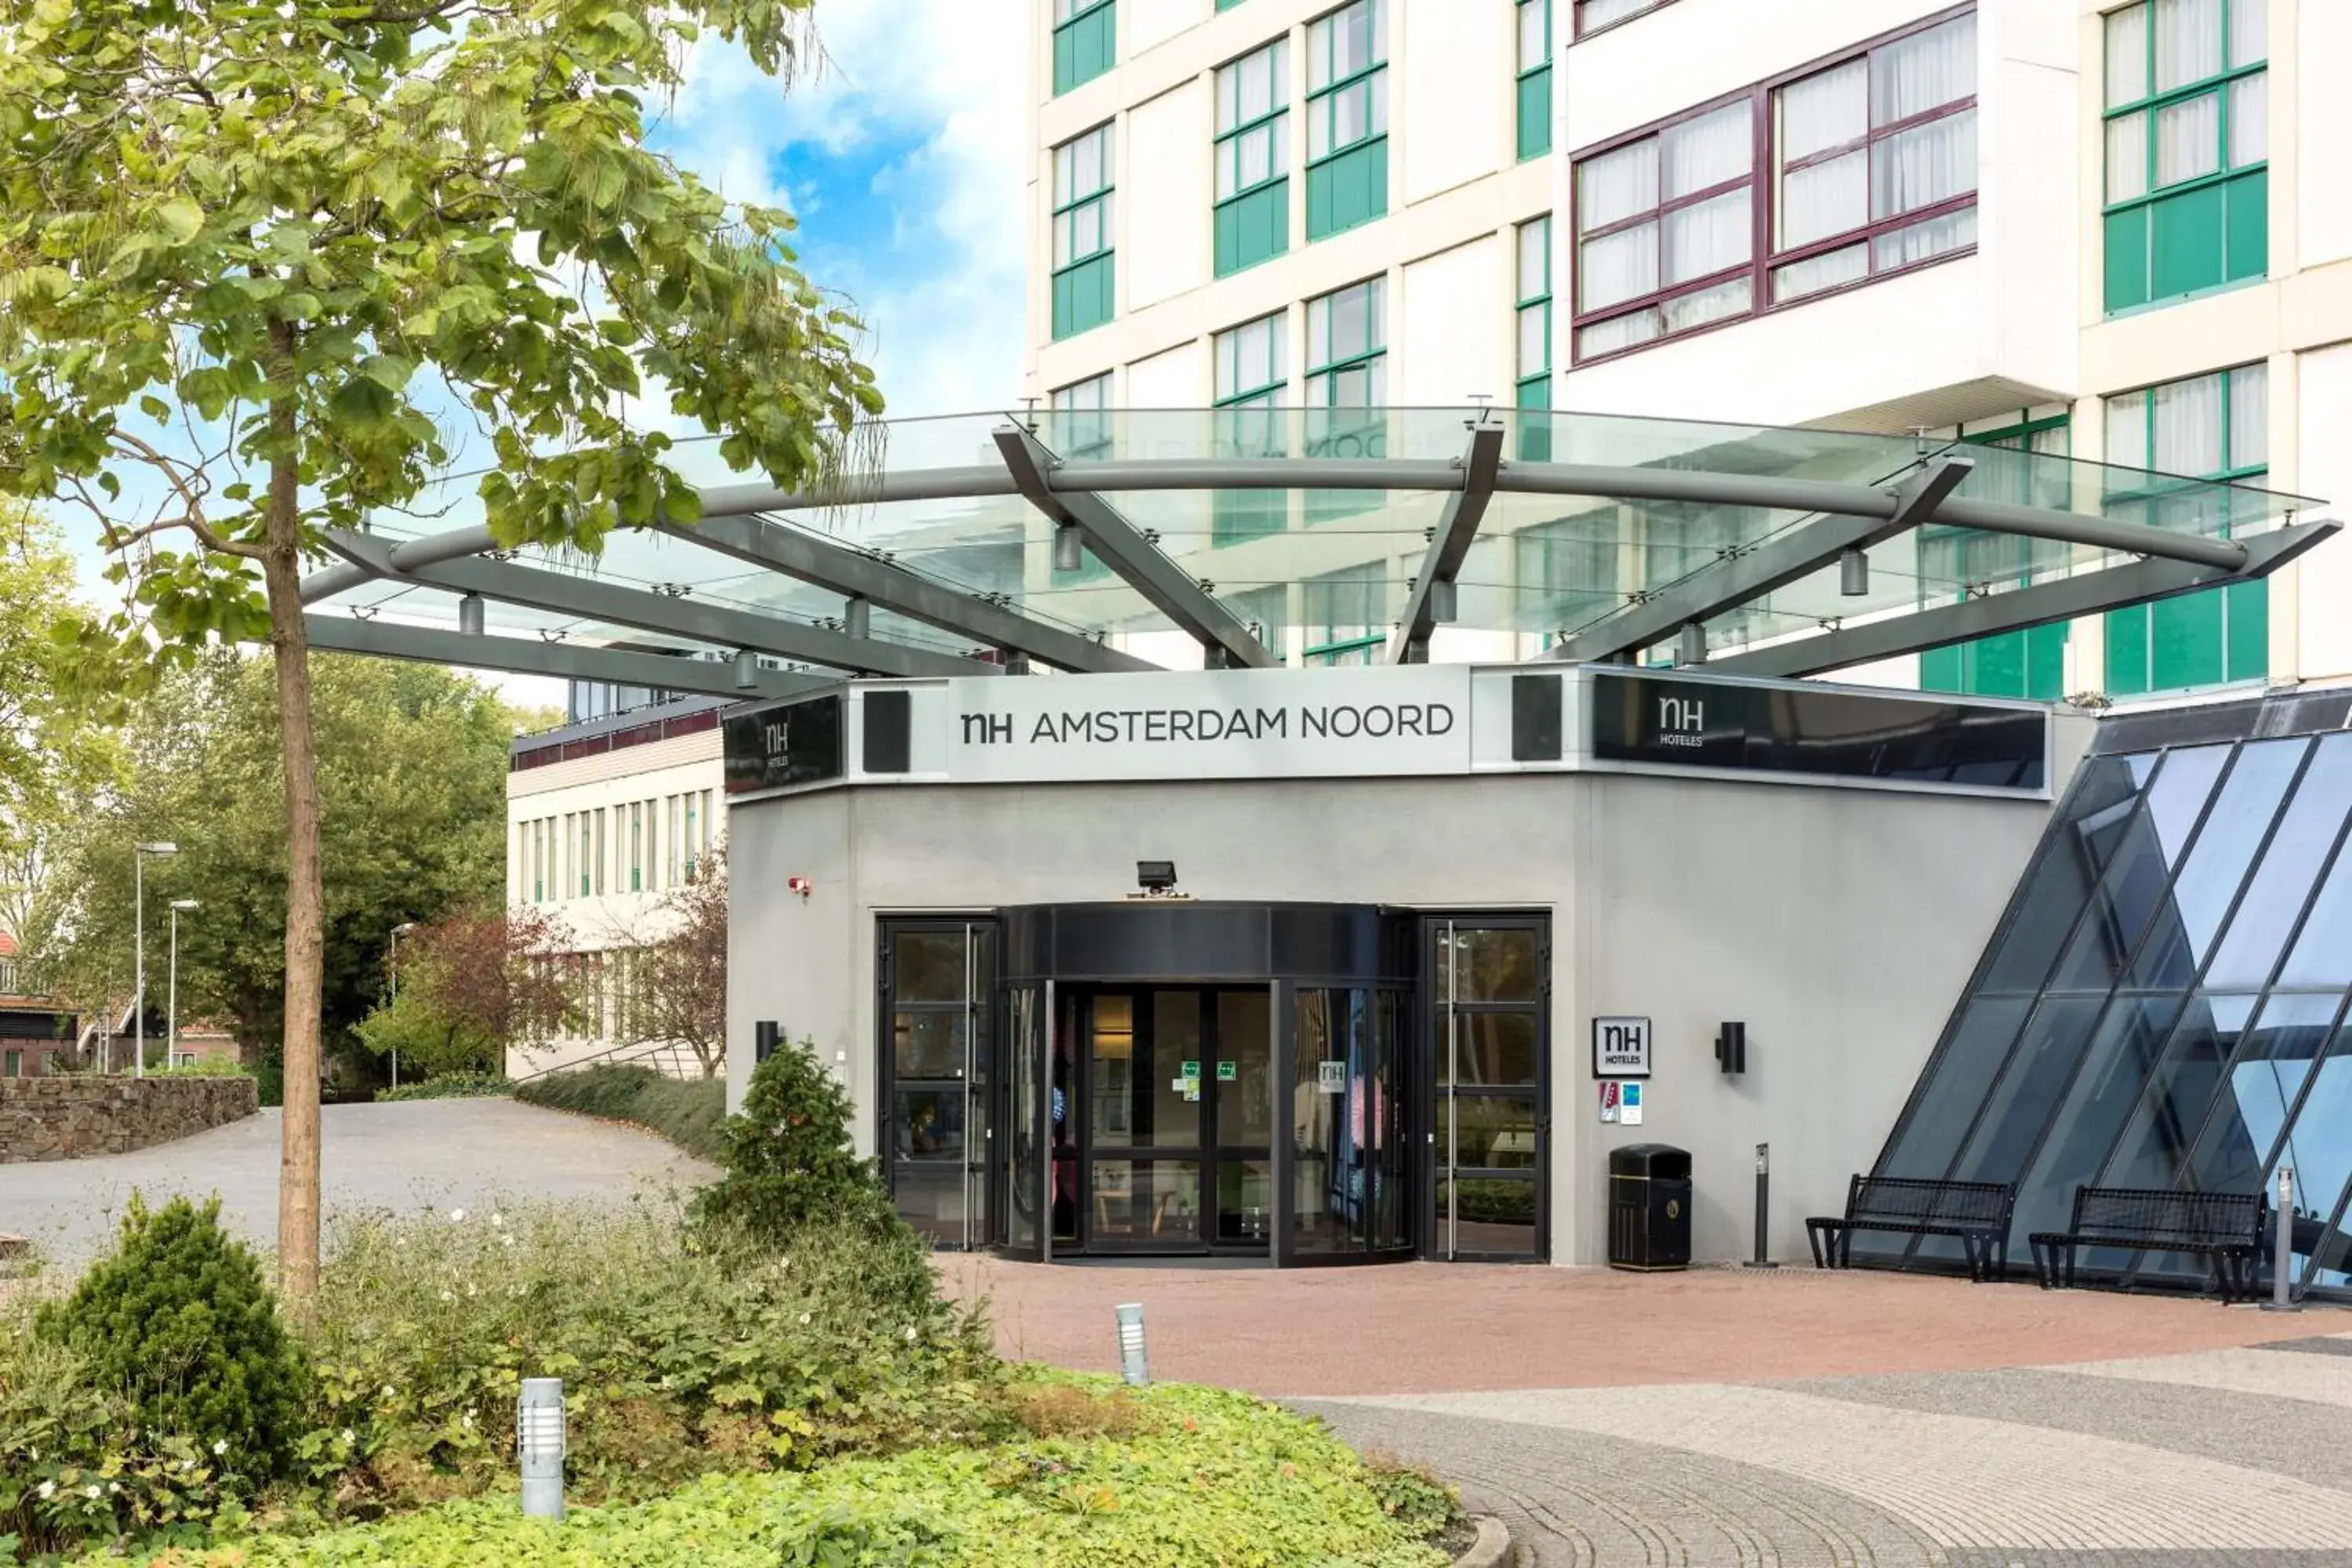 Property building in NH Amsterdam Noord